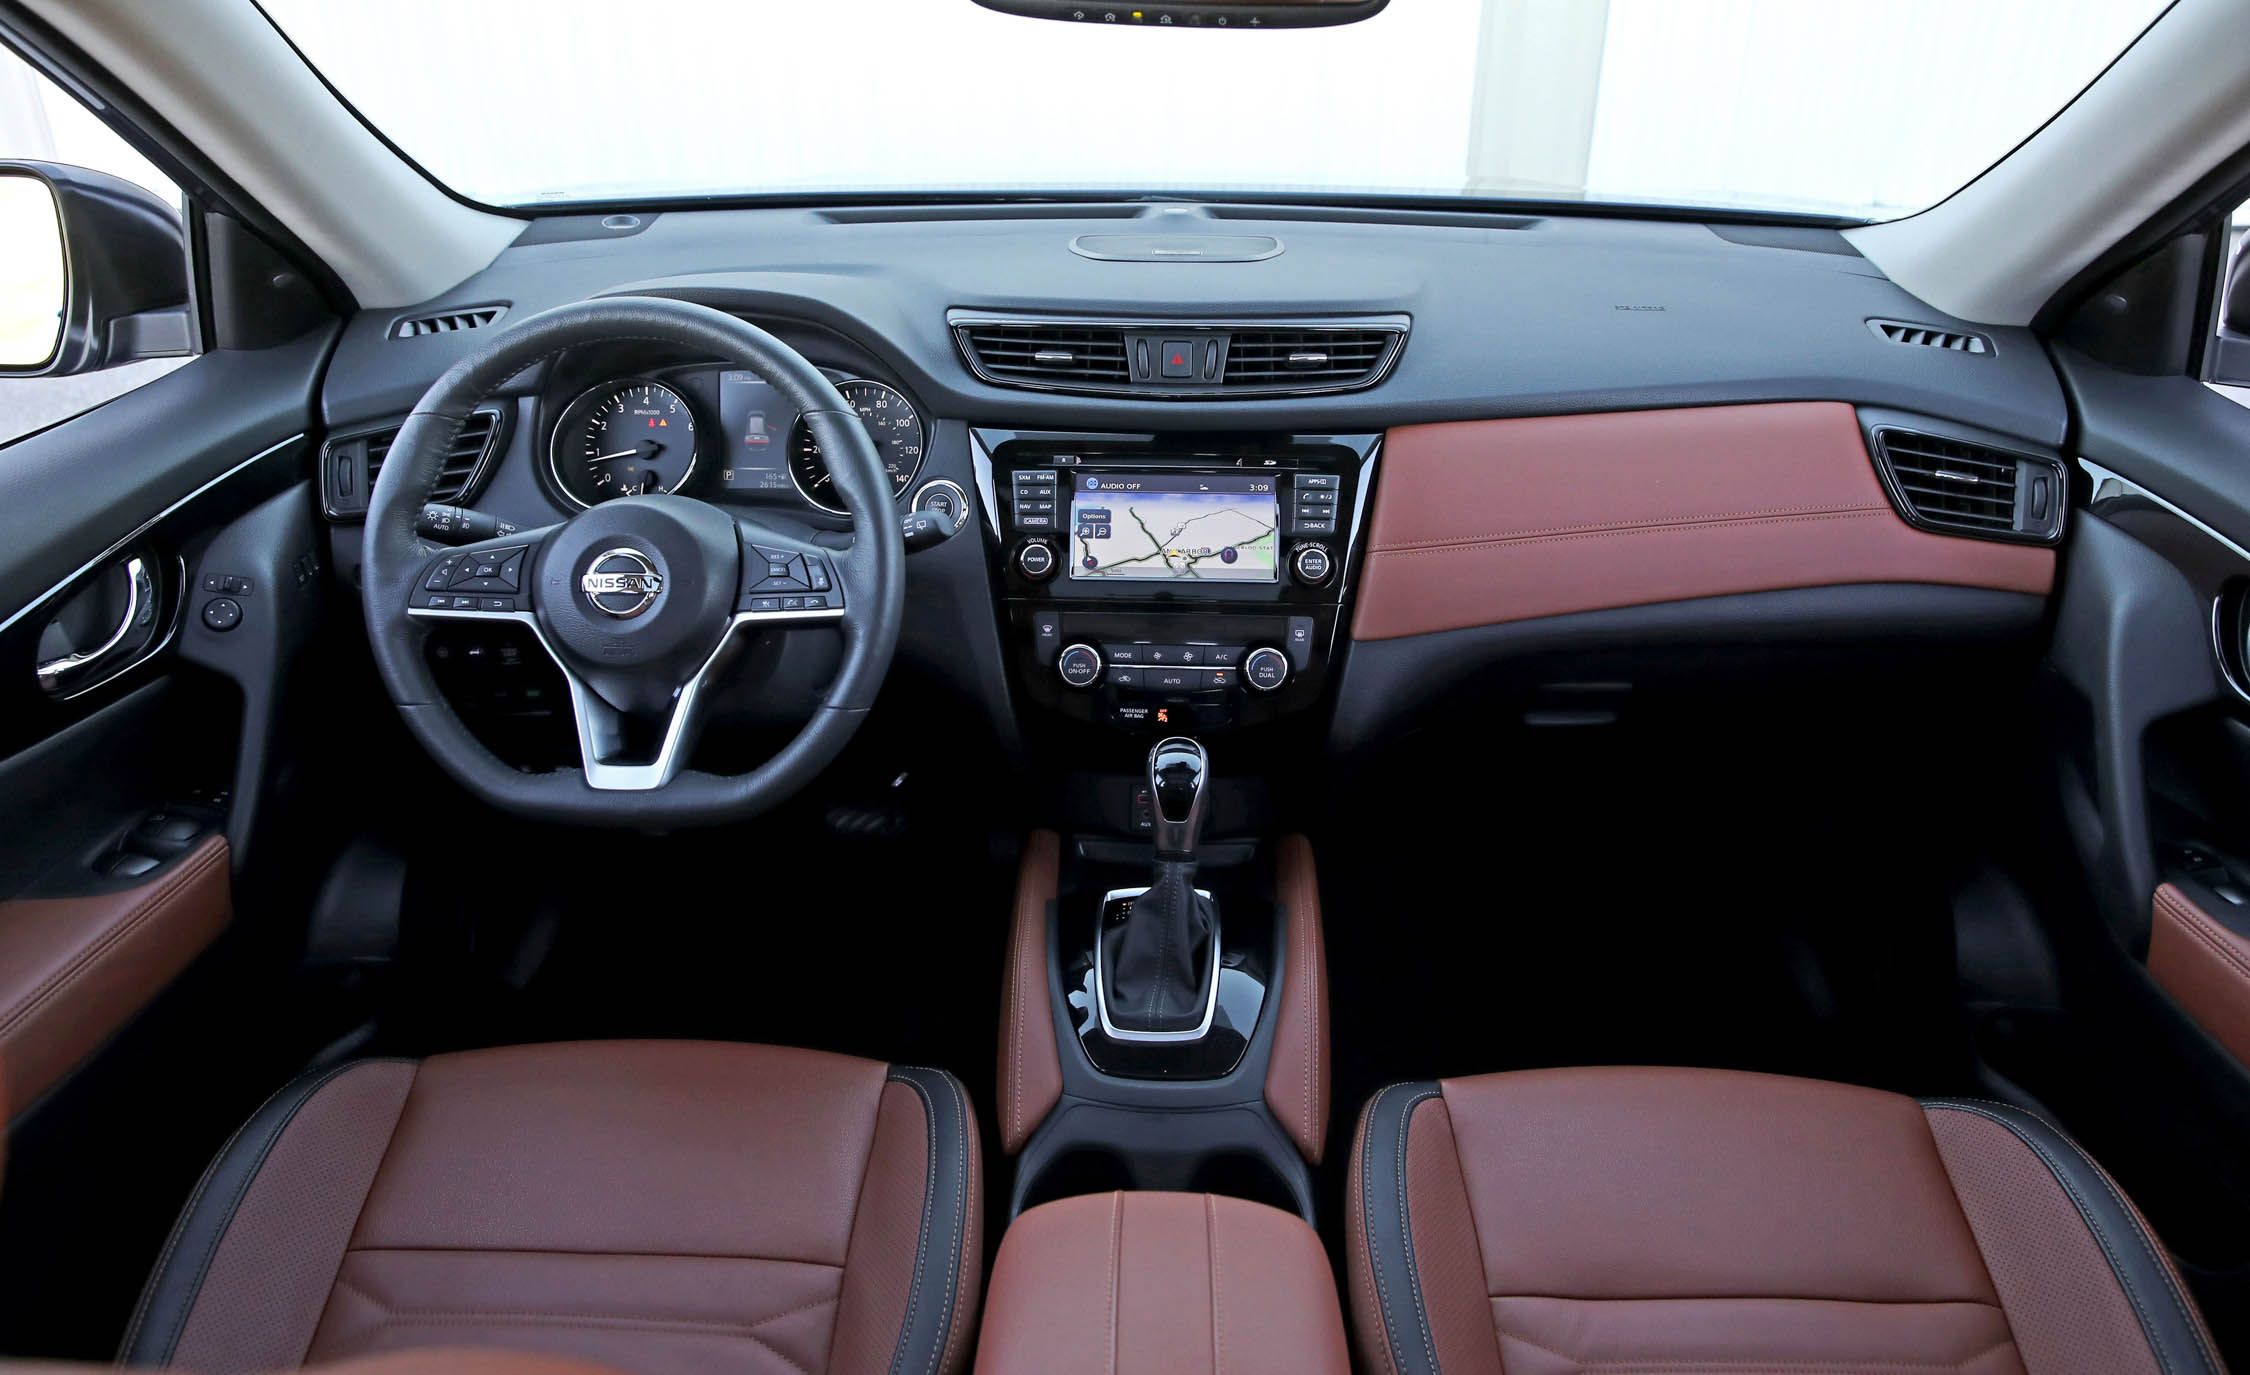 2017 Nissan Rogue Interior (View 19 of 37)